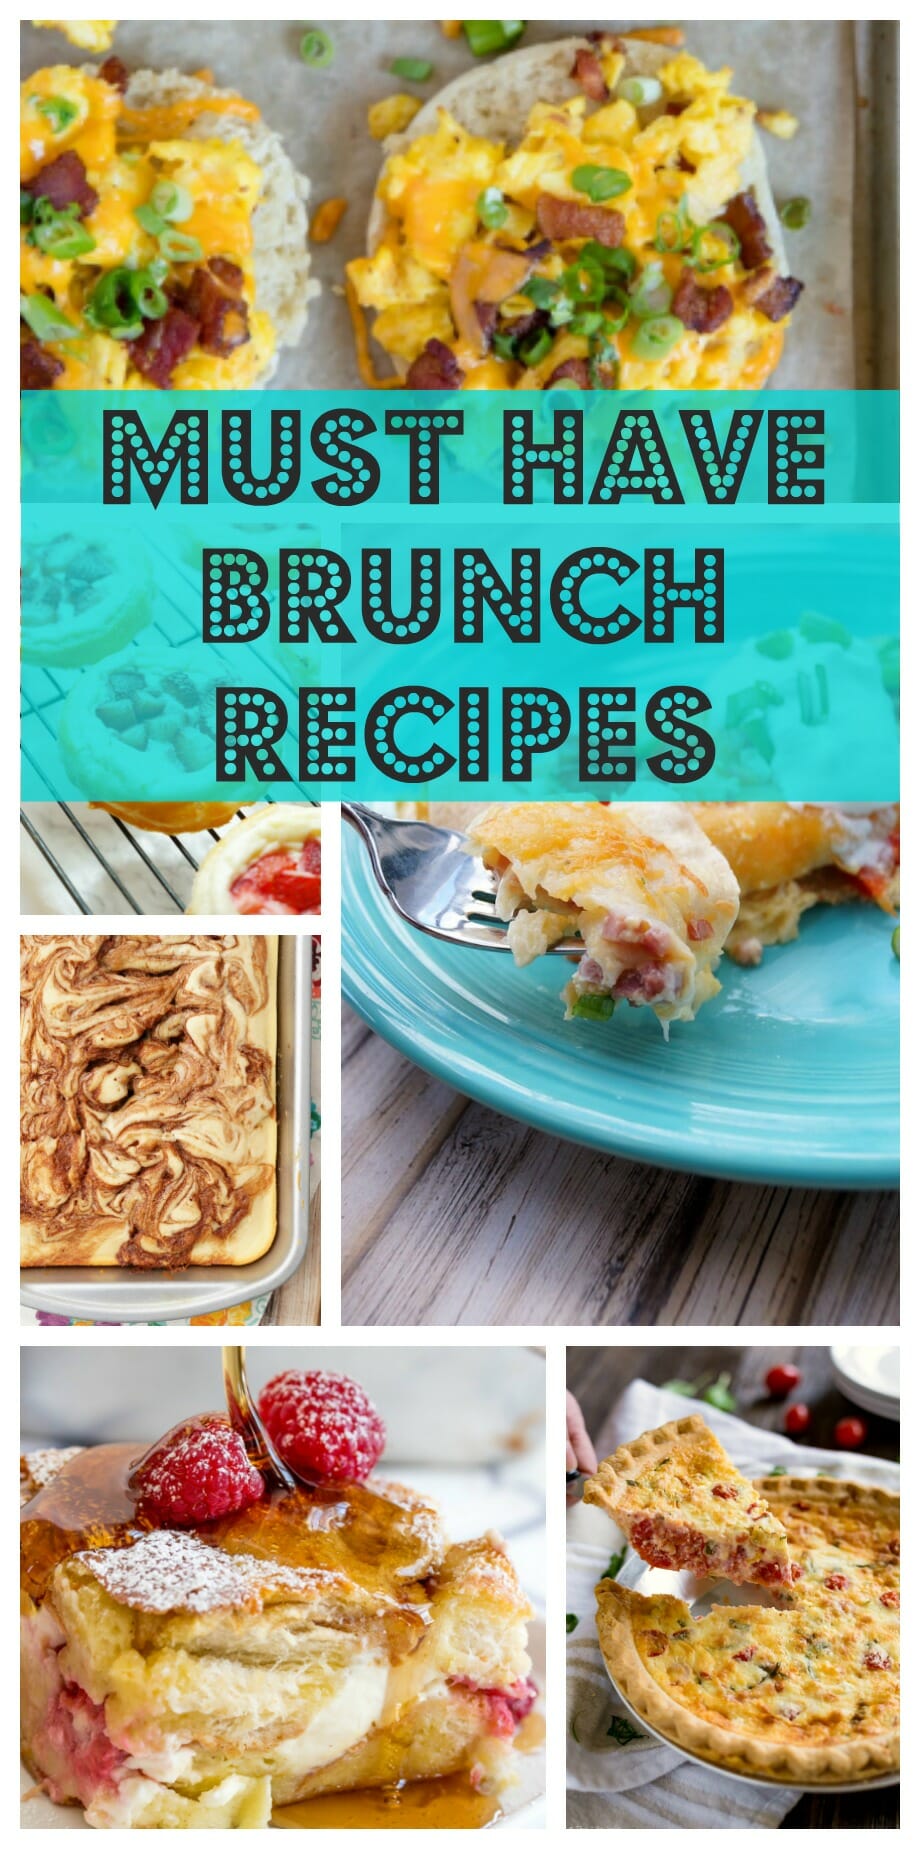 Easy and Delicious Sweet and Savory Brunch Recipes. These are all must makes for any brunch occasion!